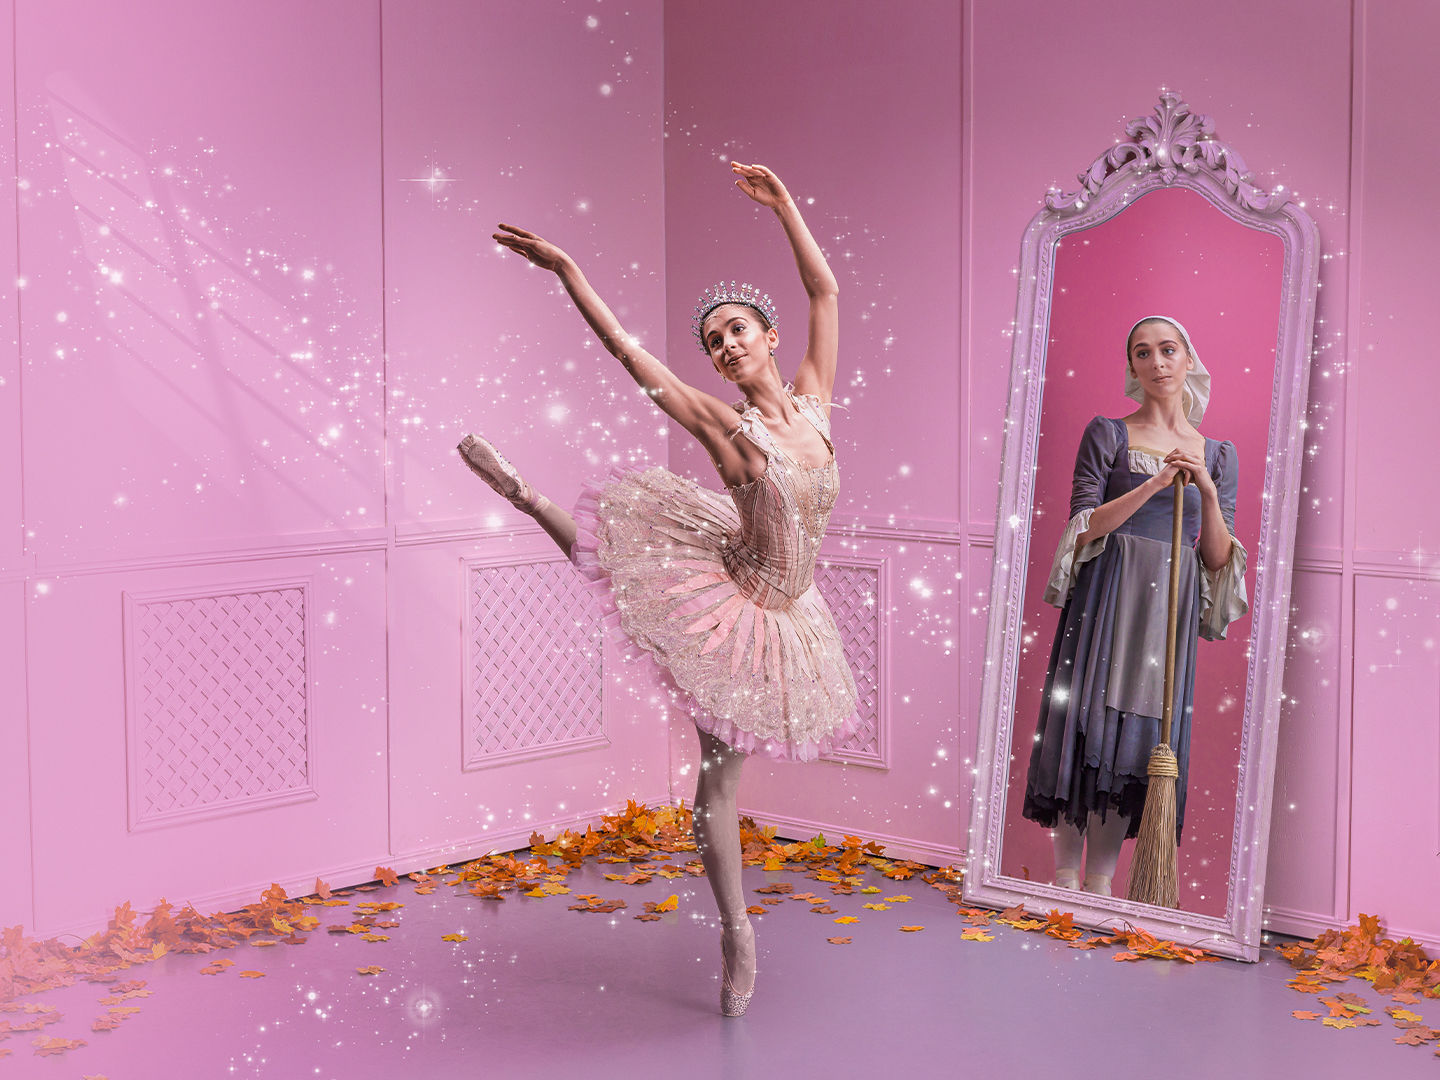 Queensland Ballet’s Cinderella to Enchant Audiences of All Ages